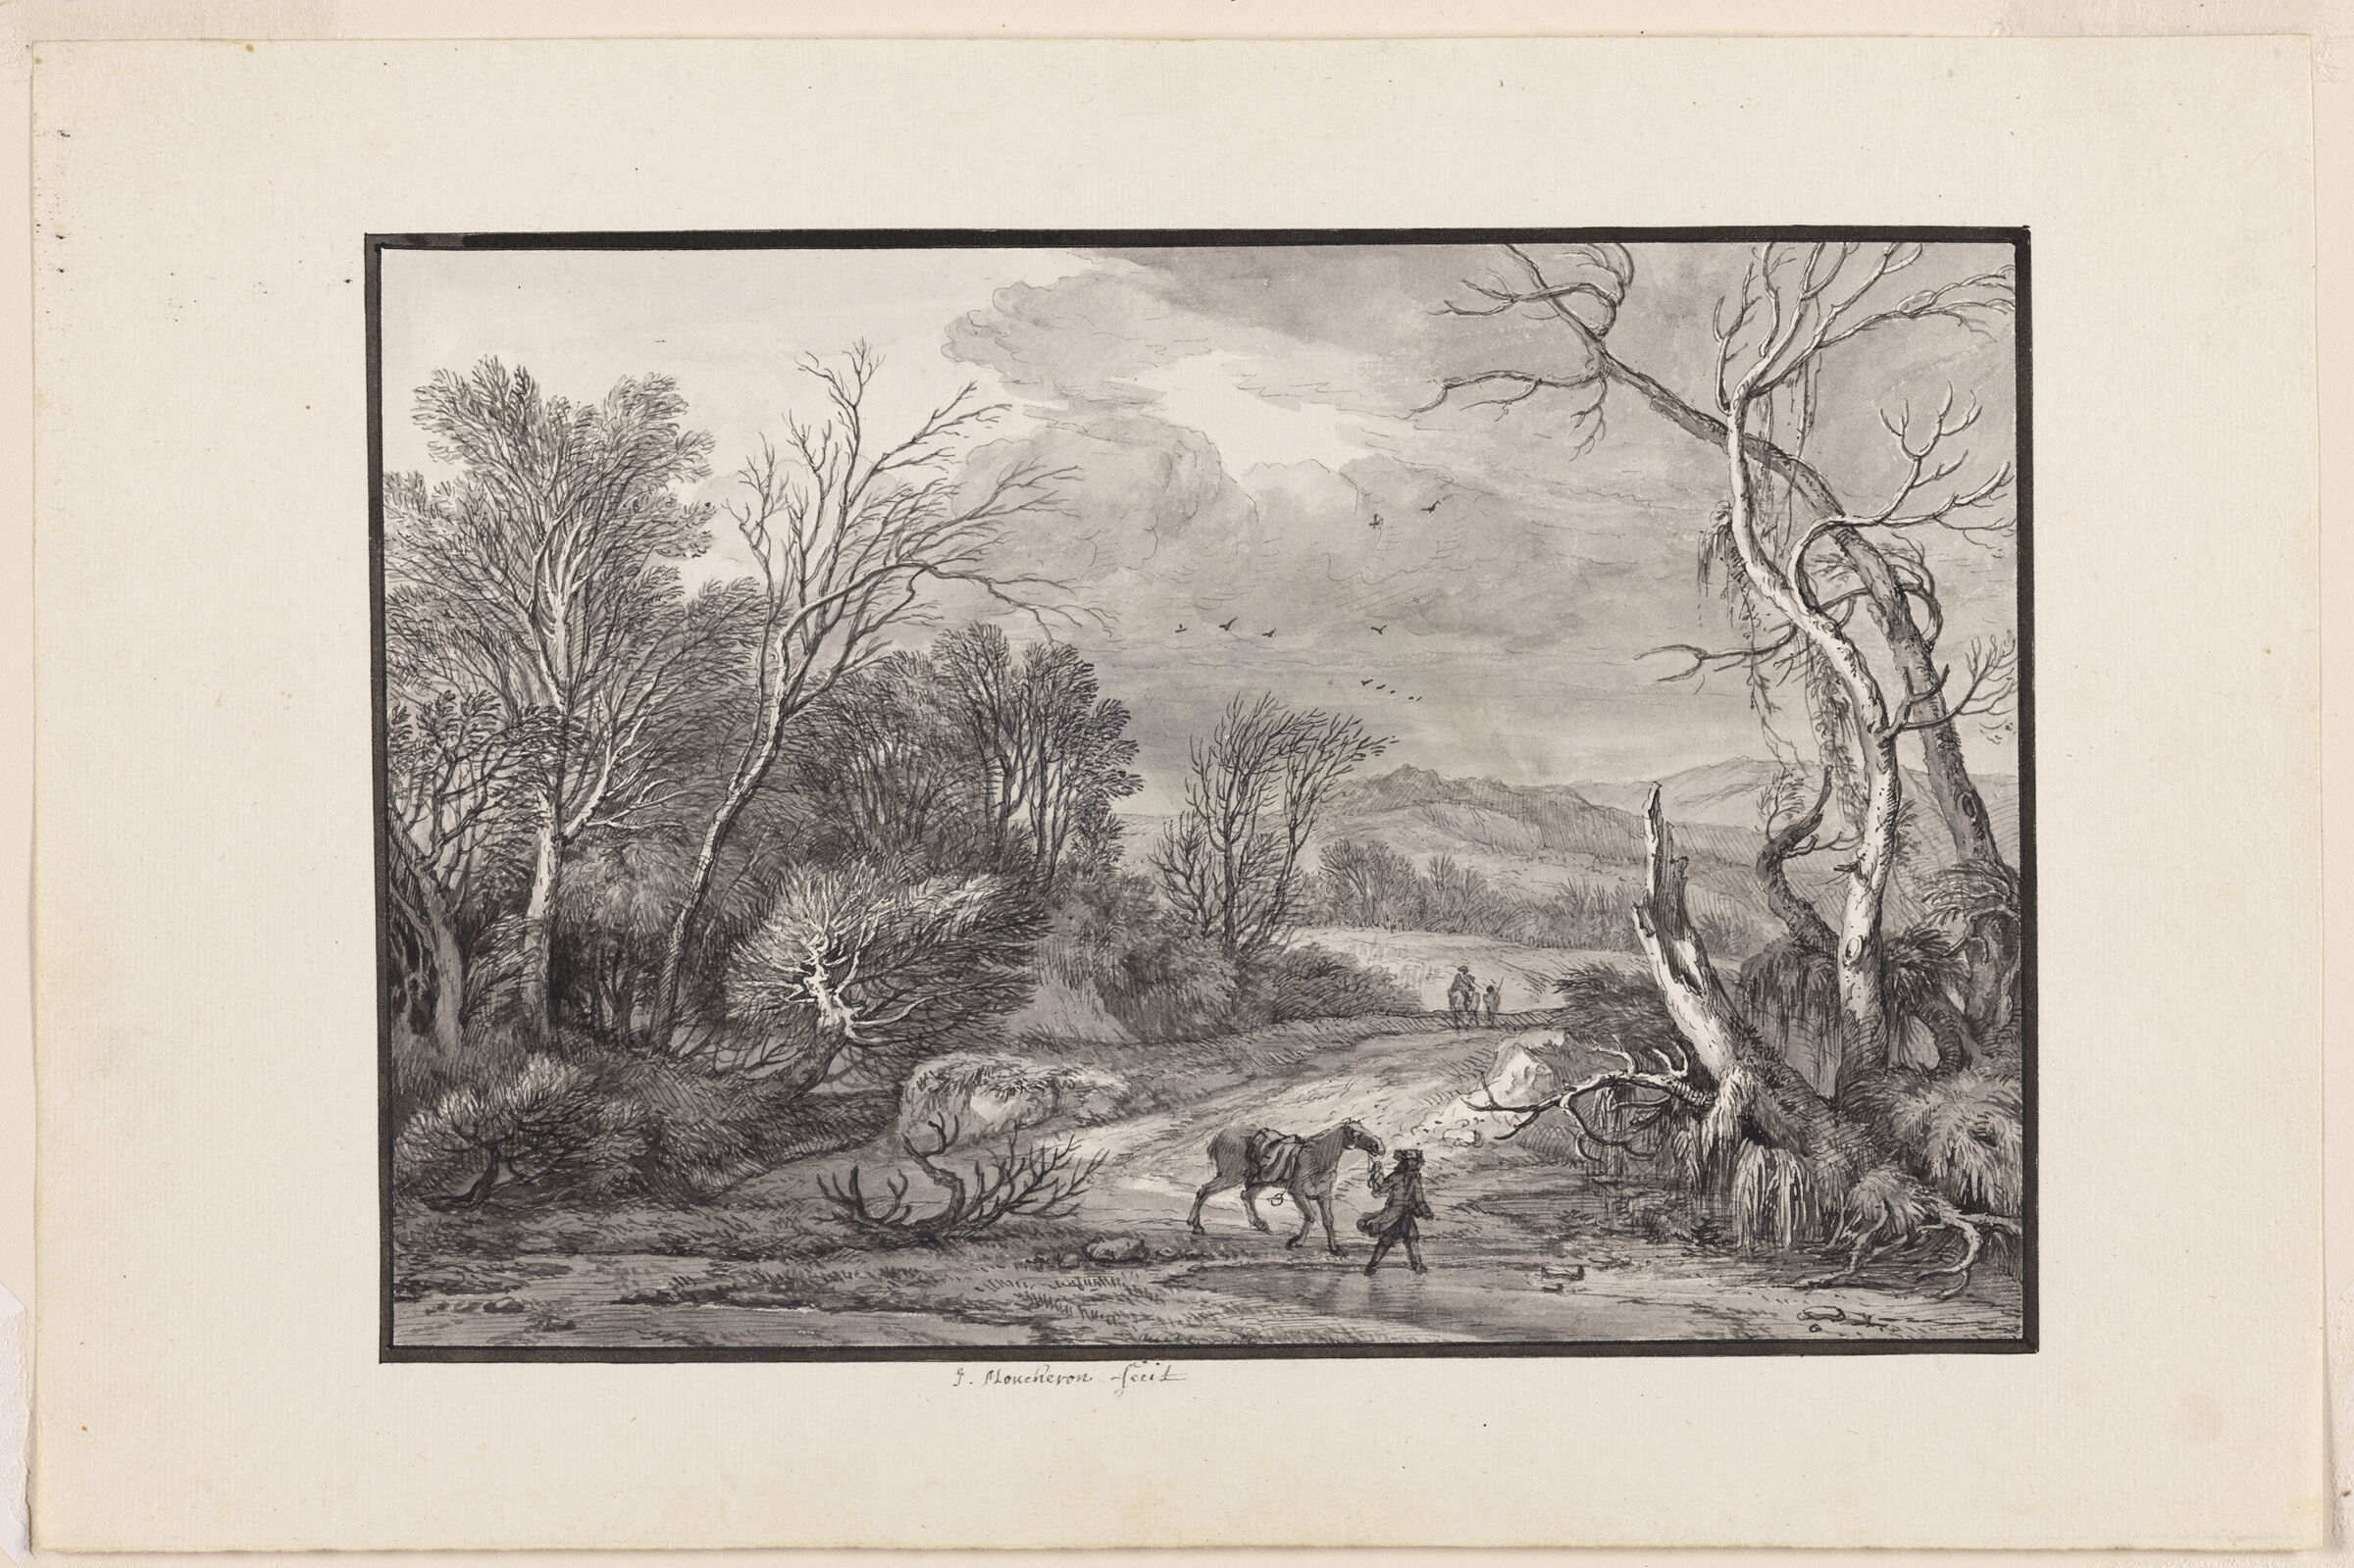 Man Leading A Horse By A Pond In A Stormy, Wooded Landscape